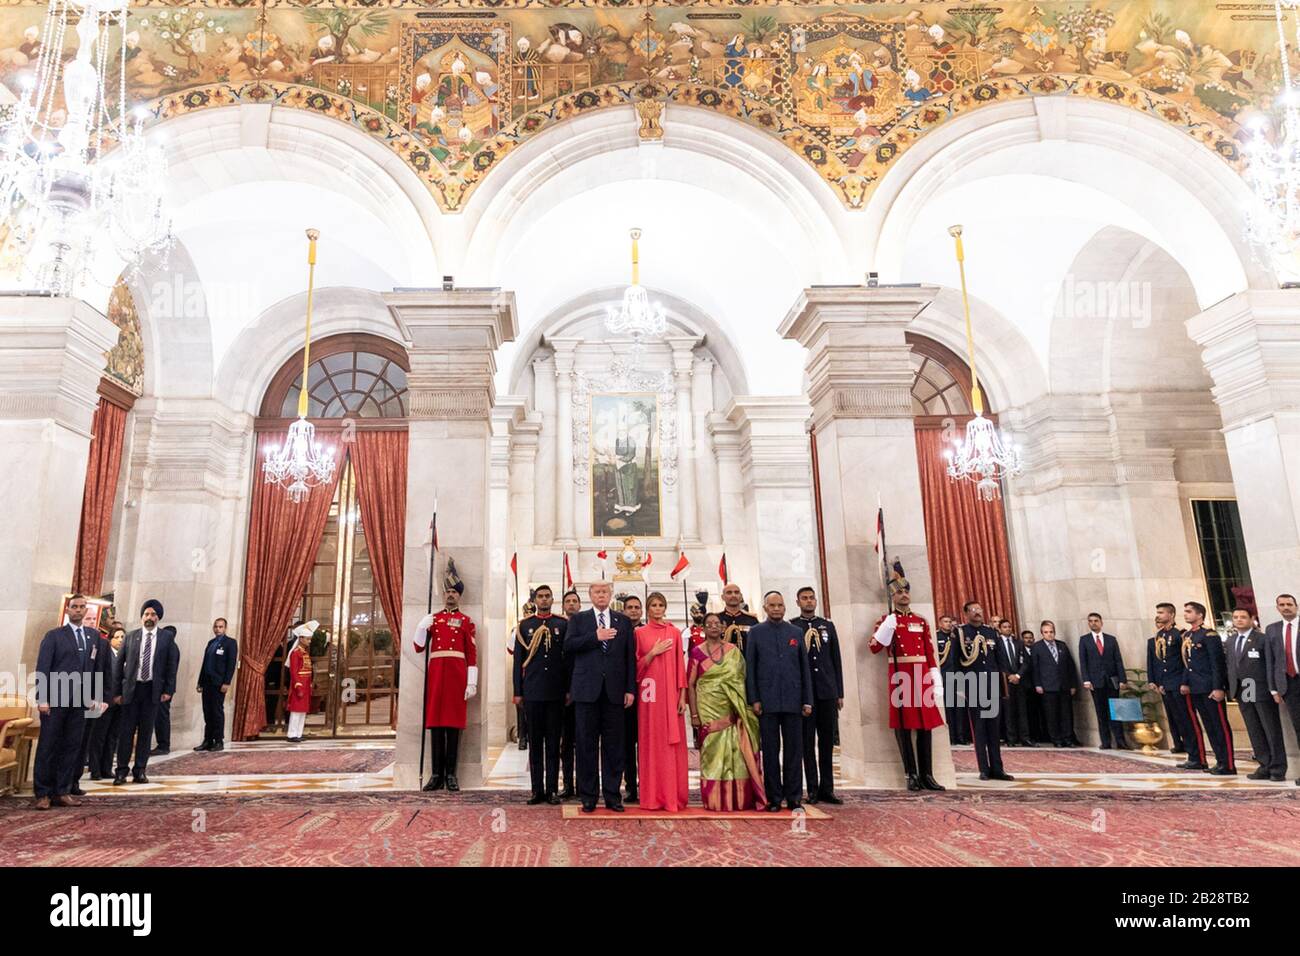 New Delhi, India. 25th Feb, 2020. President Donald J. Trump and First Lady Melania Trump, joined by Indian President Ram Nath Kovind and his wife Mrs. Savita Kovind, place their hands on their hearts while the United States National Anthem is played during a state banquet welcome ceremony Tuesday, Feb. 25, 2020, at Rashtrapati Bhavan, the Presidential Palace, in New Delhi, India. People: President Donald J. Trump, First Lady Melania Trump Credit: Storms Media Group/Alamy Live News Stock Photo